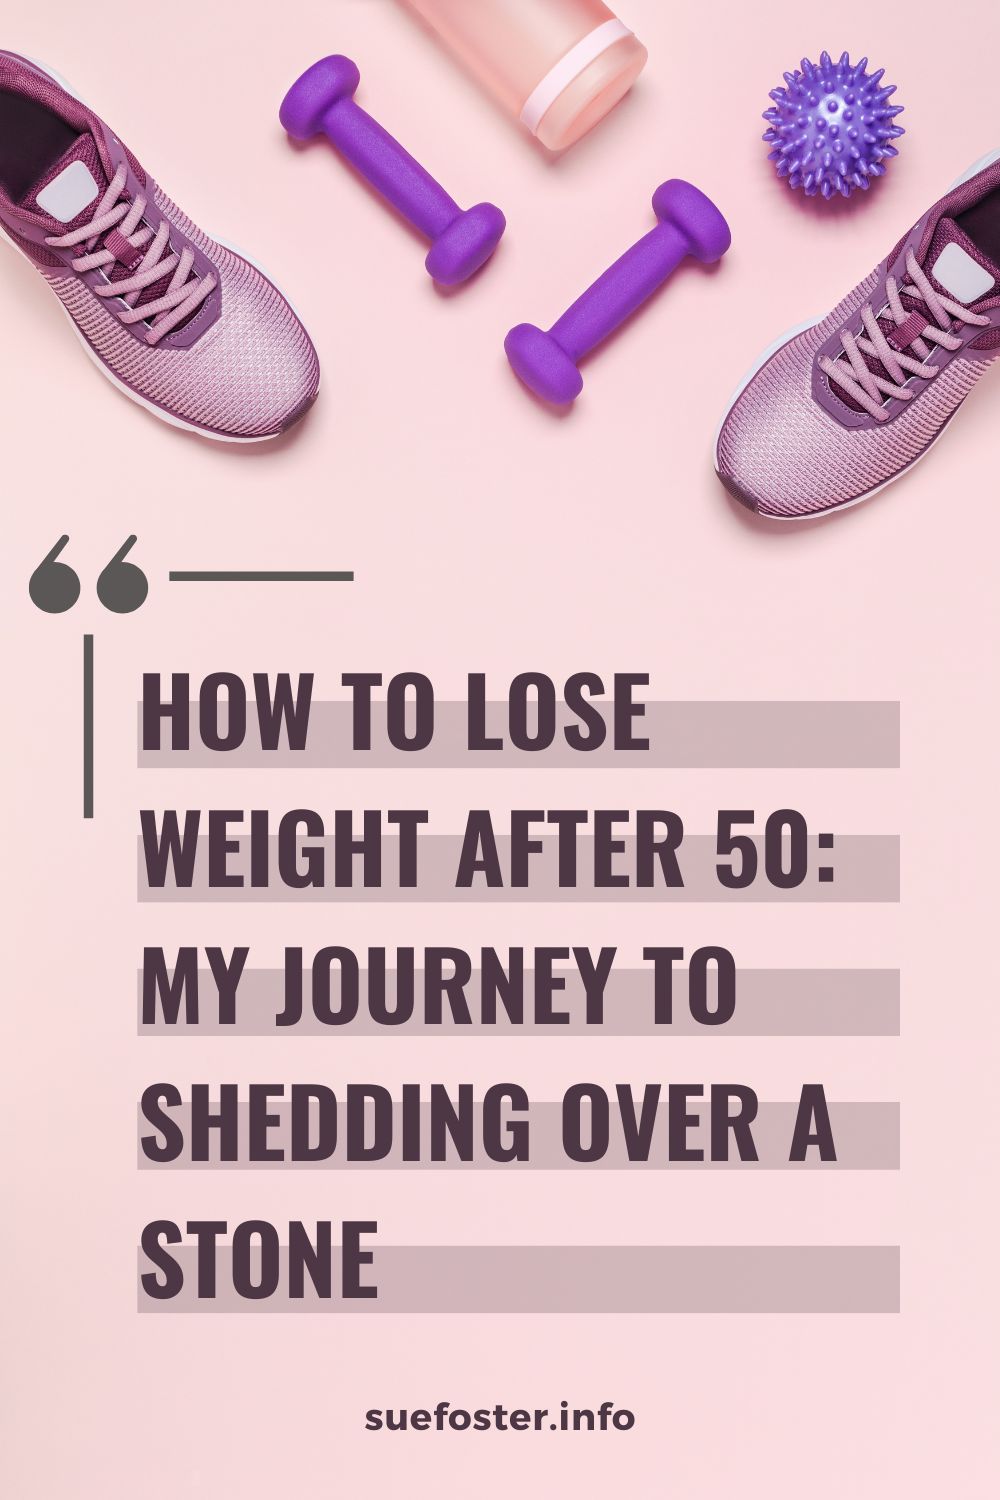 Lose weight after 50 with real-life strategies. Learn how I shed over a stone in a year through diet changes and exercise routines. 